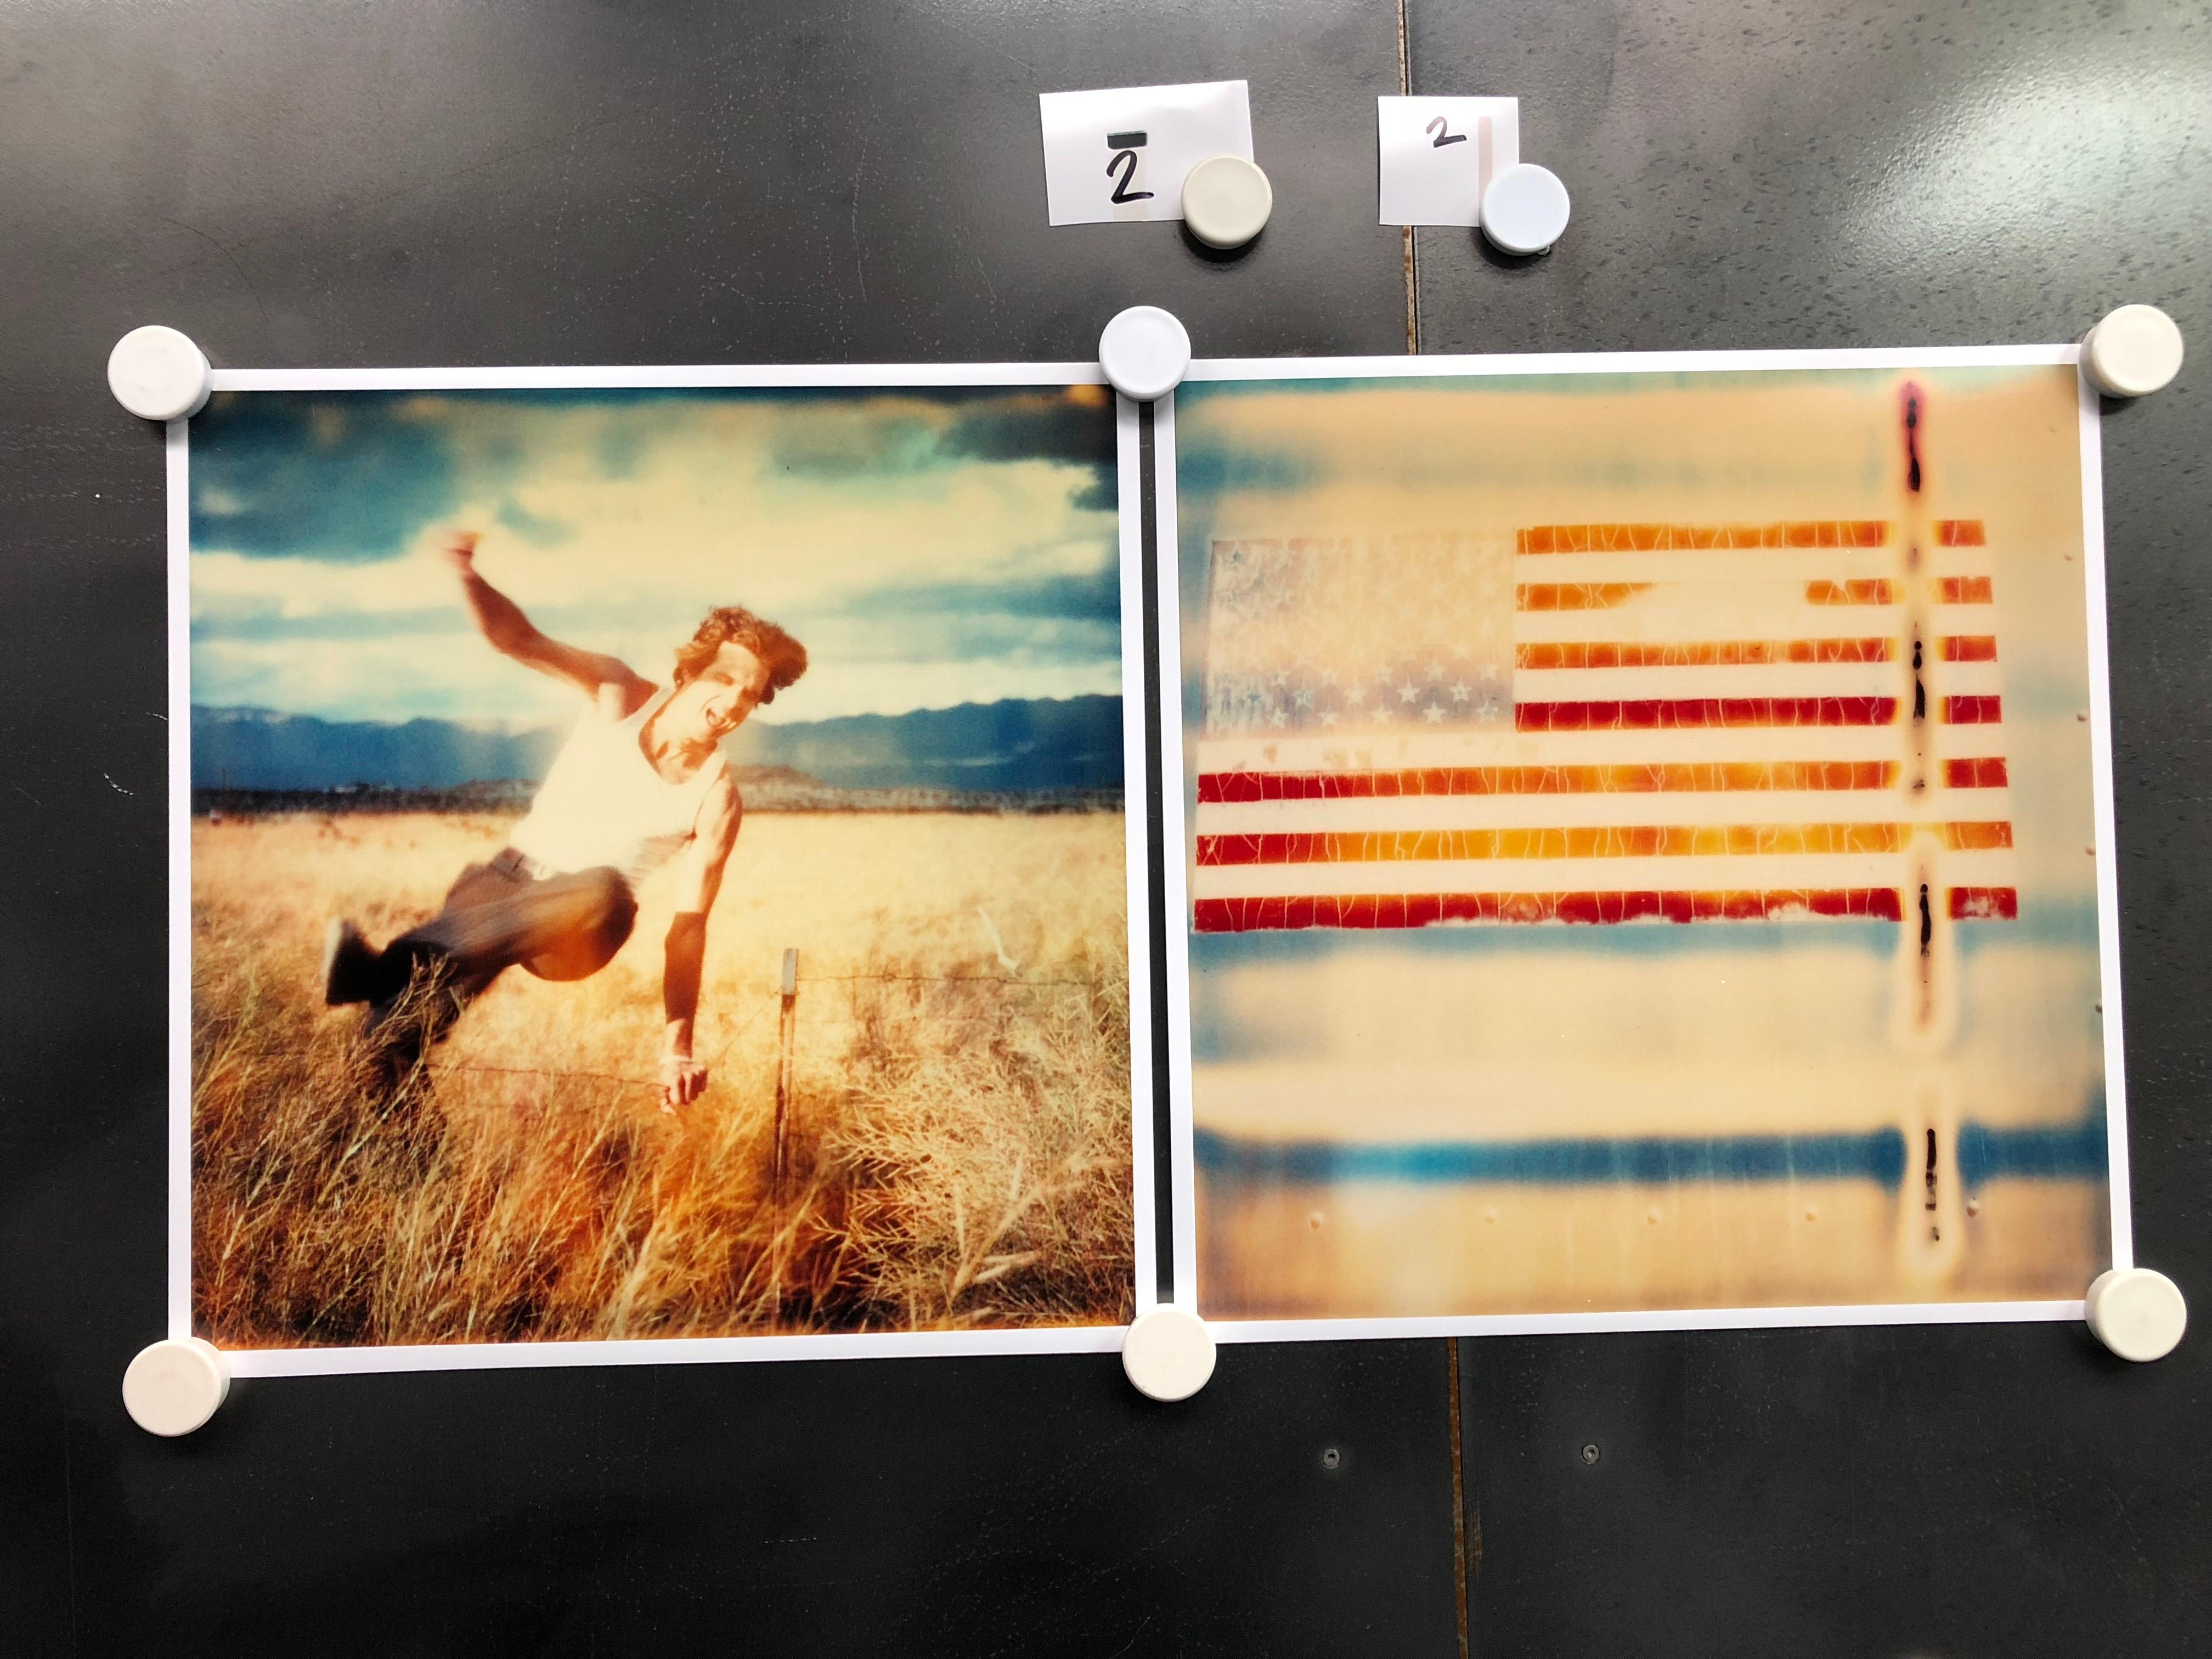 Miss America (Sidewinder), diptych, 38.5 x 38 cm each, installed 38.5 x 81cm, 2005,
Edition 3/5, 
analog C-Print, hand-printed by the artist in September 2018, based on a Polaroid
Artist Inventory 3131.10, 
not mounted

Stefanie Schneider's